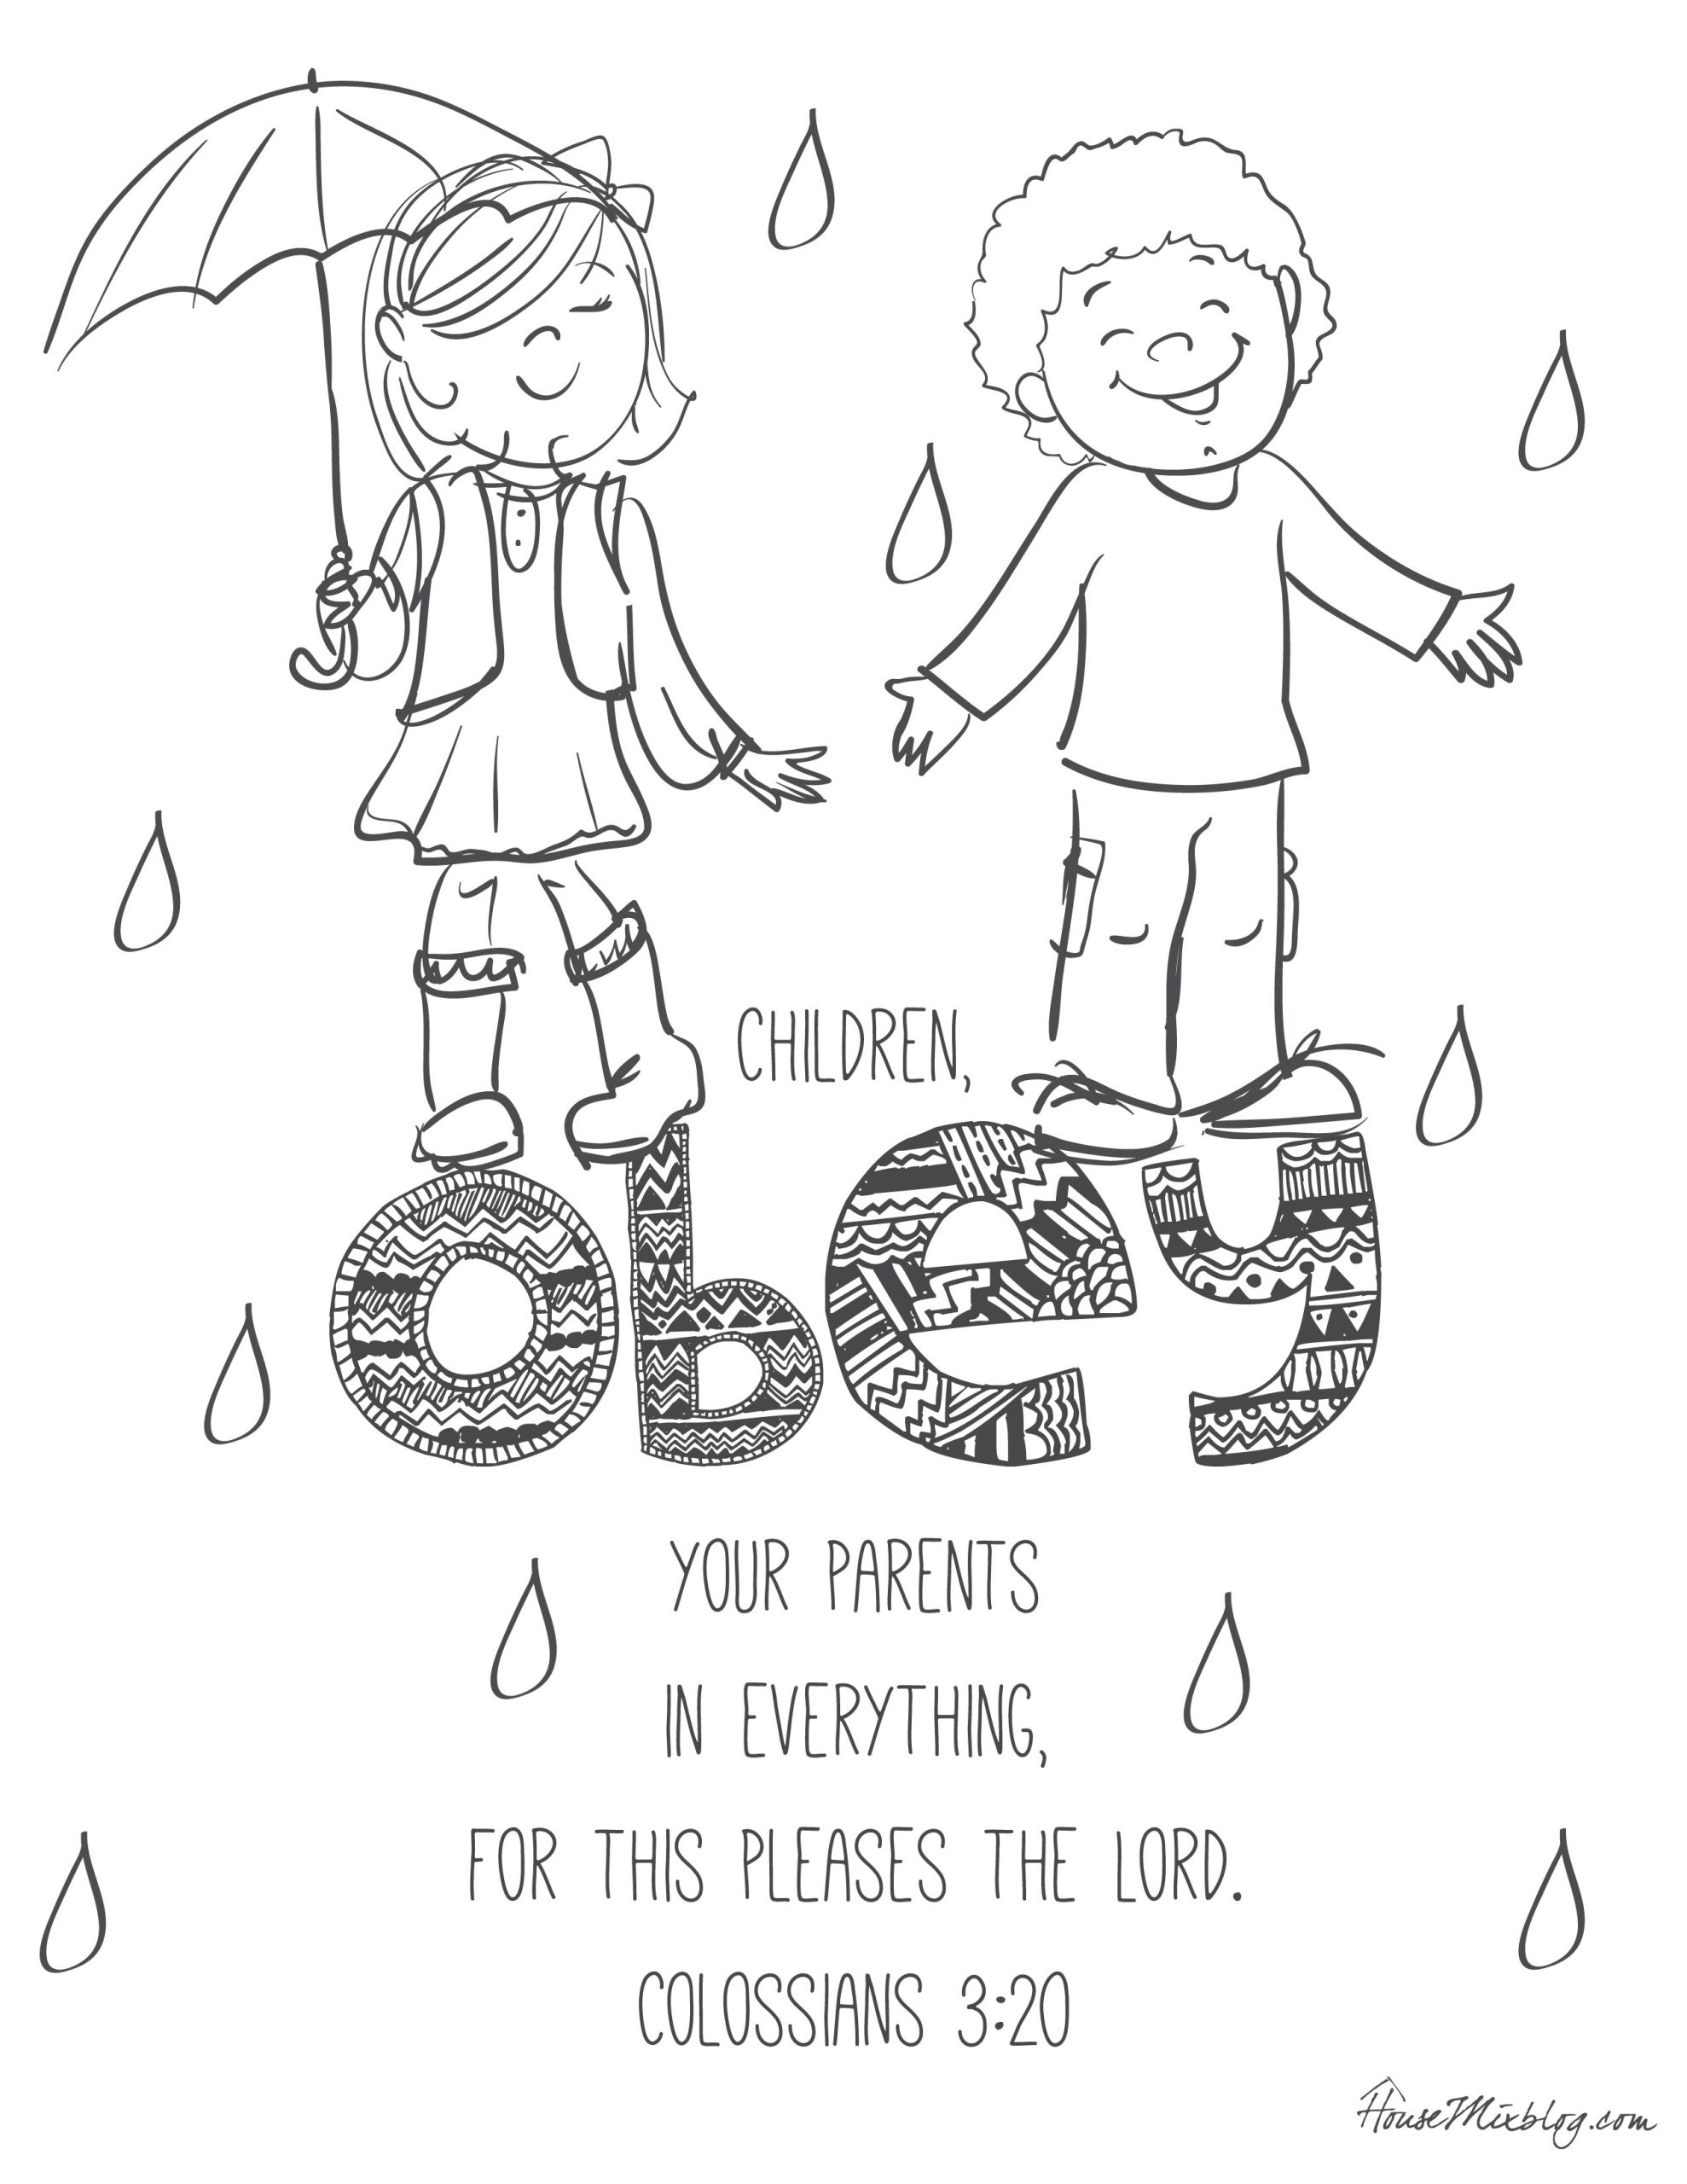 Free Bible Coloring Pages For Kids
 11 Bible verses to teach kids with printables to color